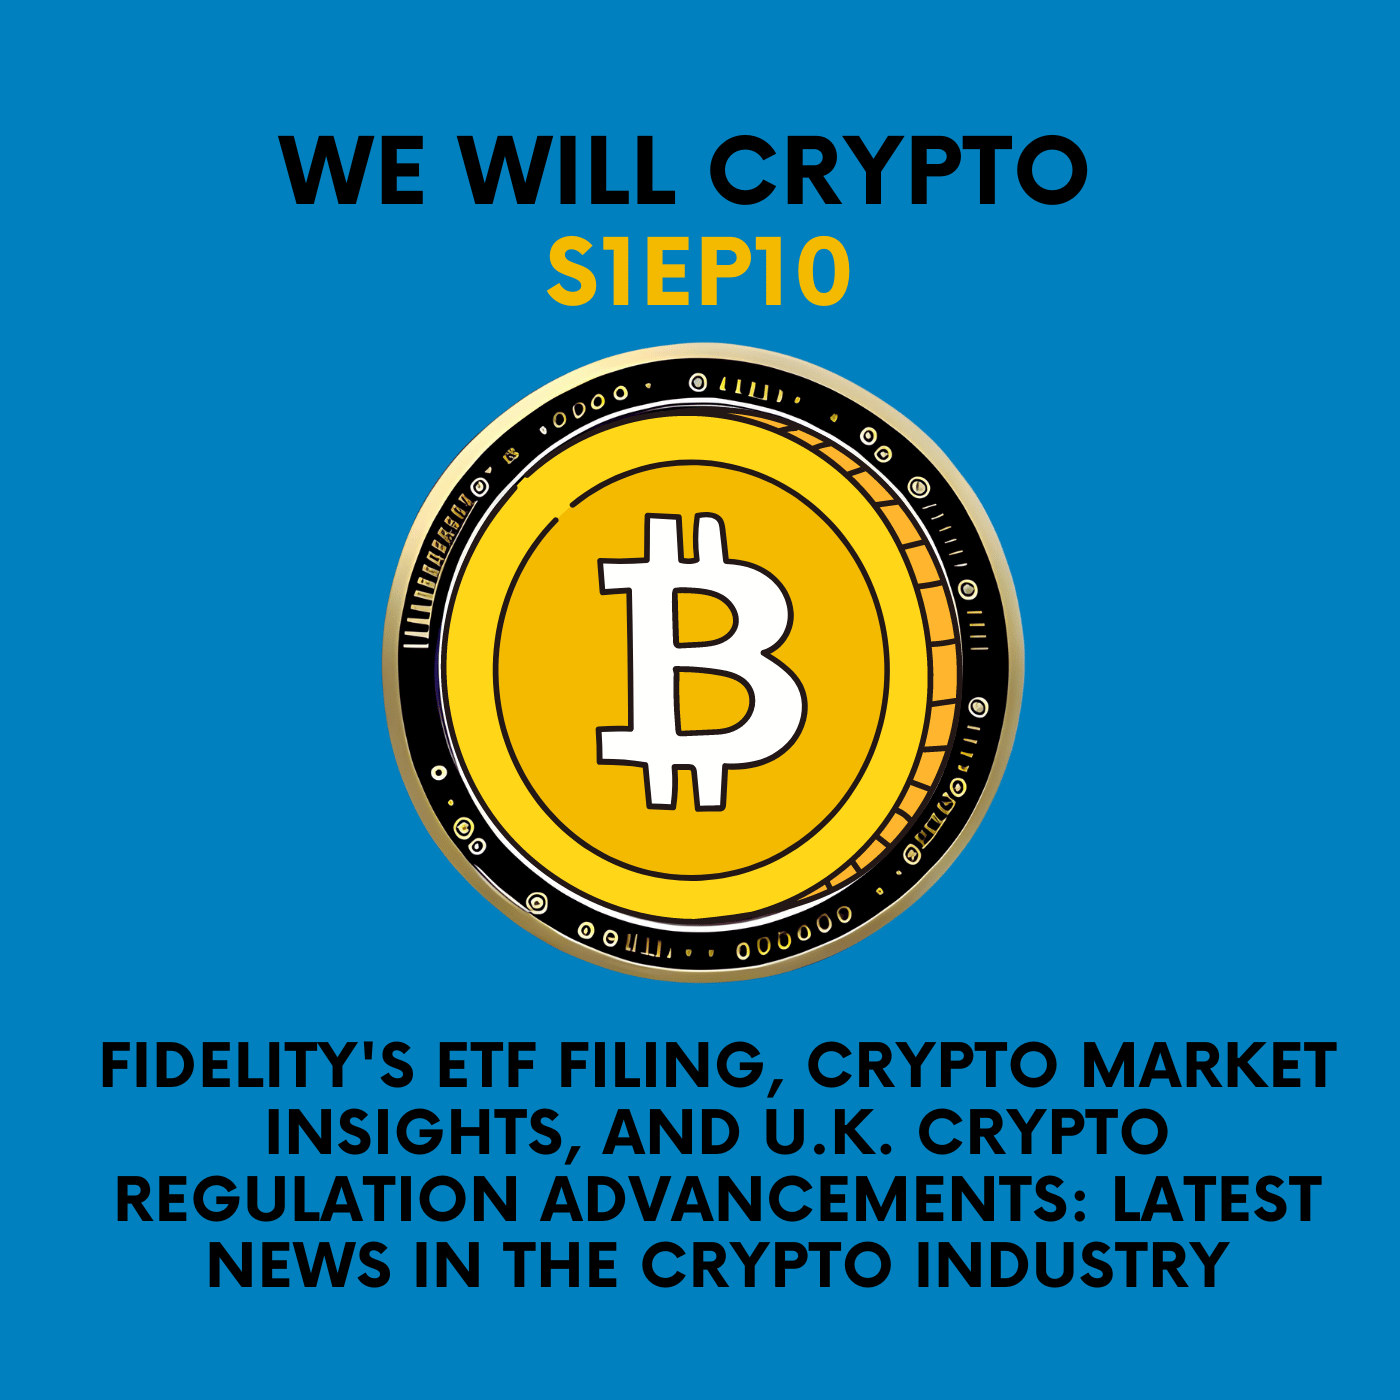 Fidelity's ETF Filing, Crypto Market Insights, and U.K. Crypto Regulation Advancements: Latest News in the Crypto Industry